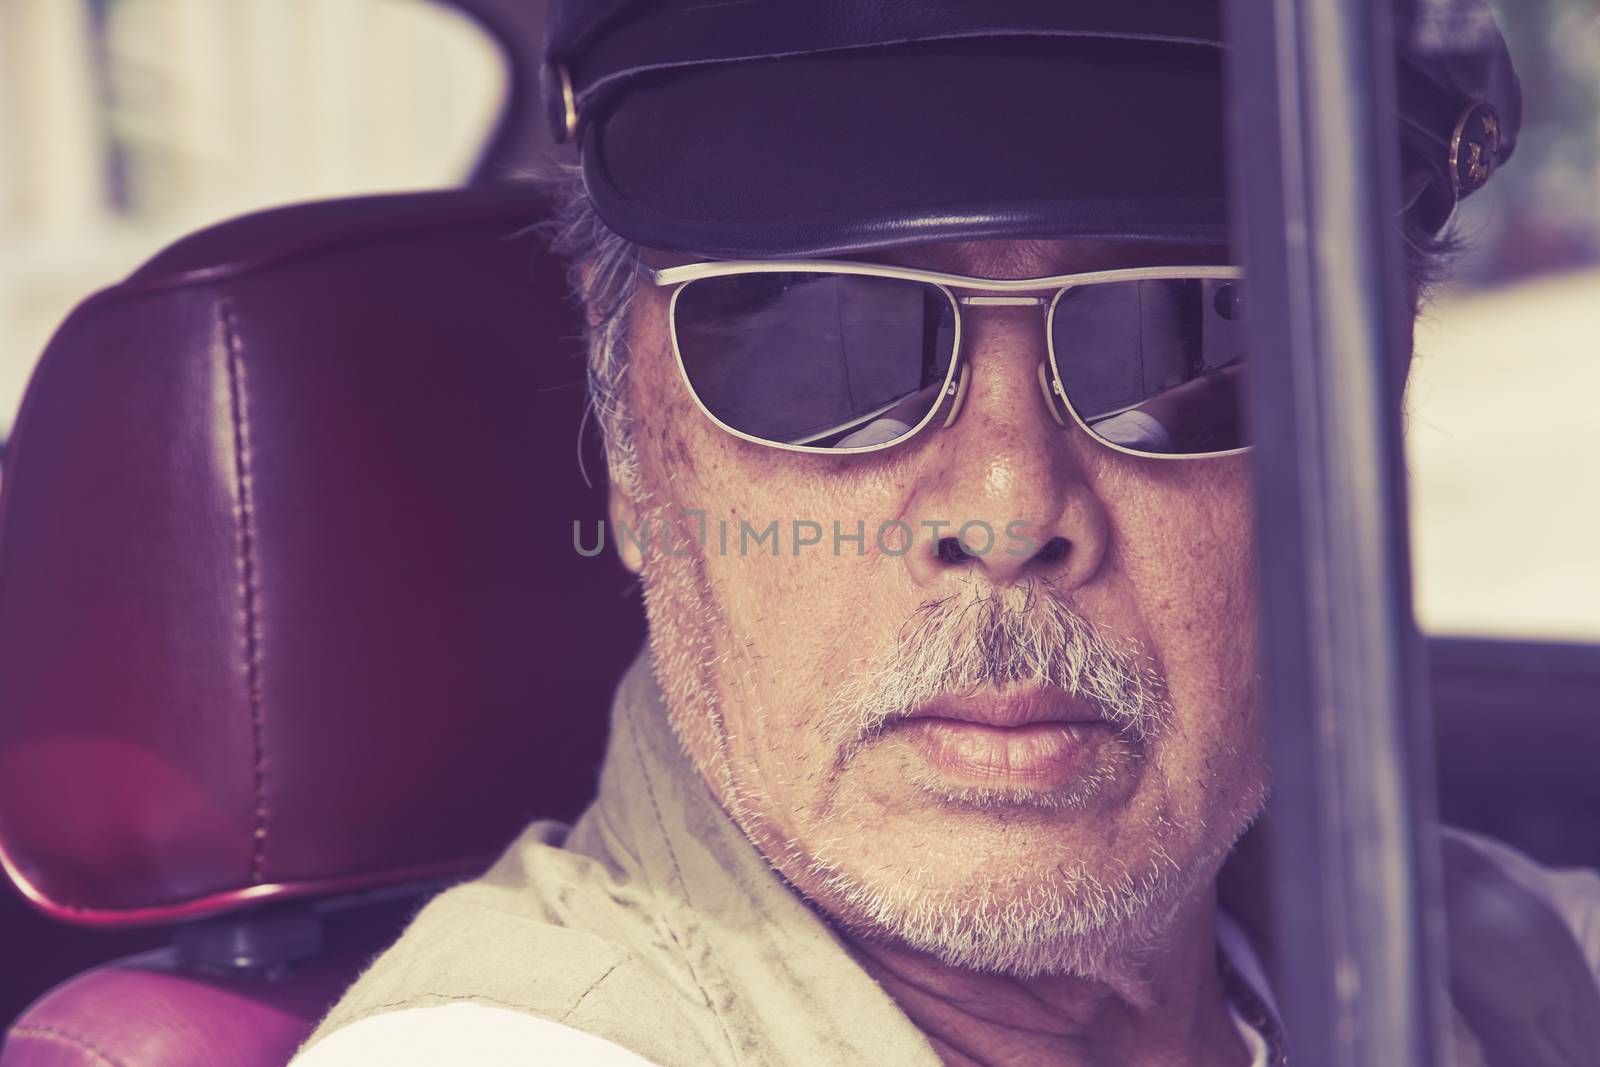 Older man with glasses driving a car by ponsulak